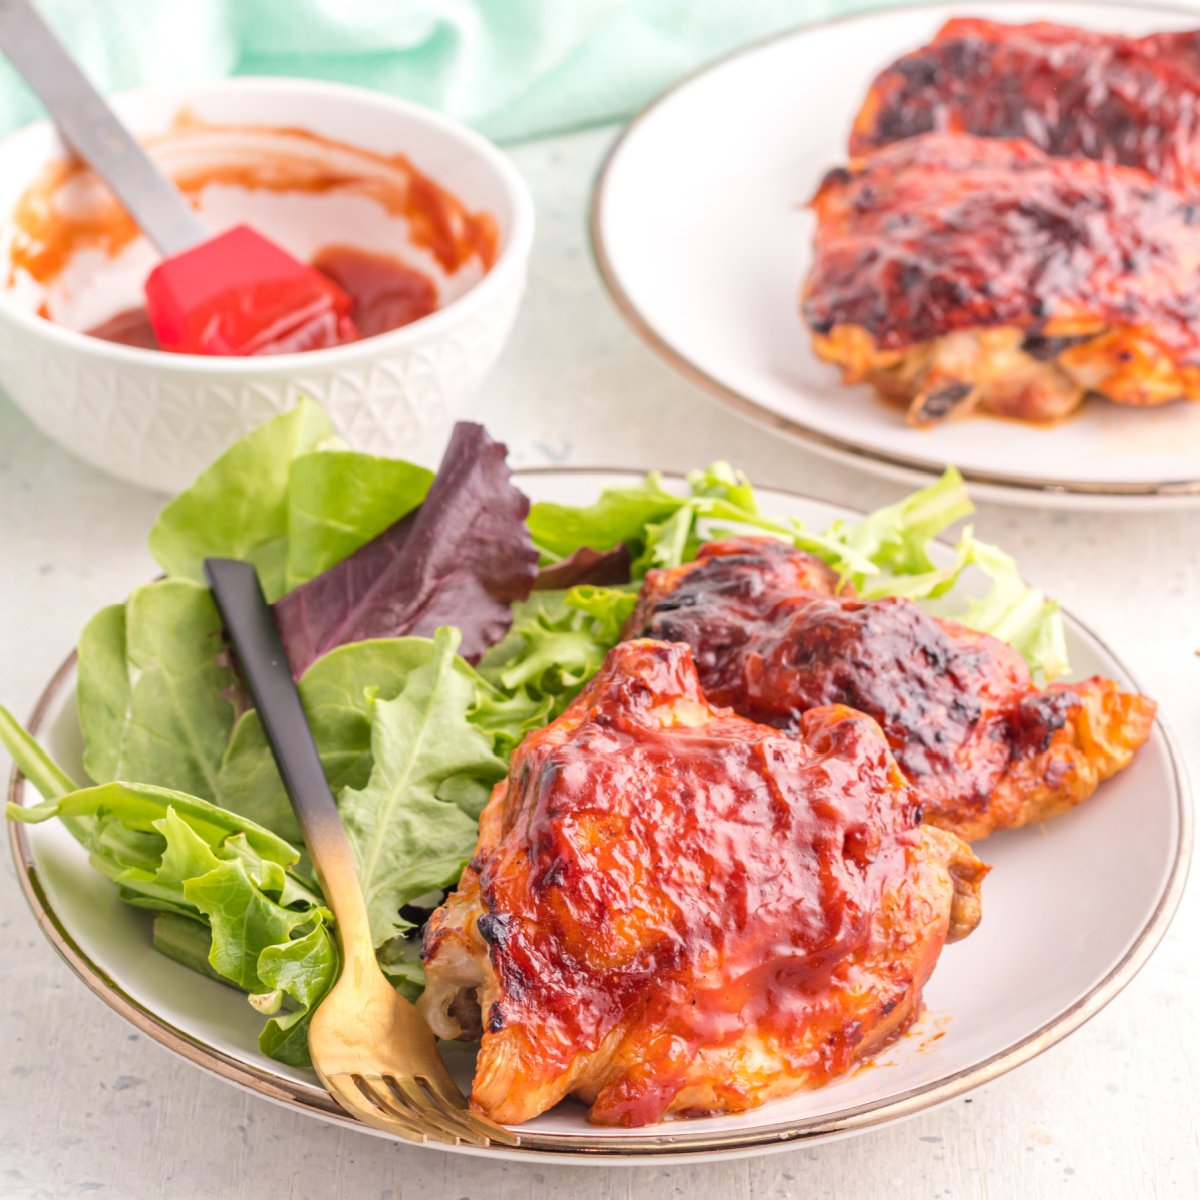 BBQ Chicken thighs on a plate with a side salad, and chicken thighs in the background with a bowl and basting brush with BBQ sauce.